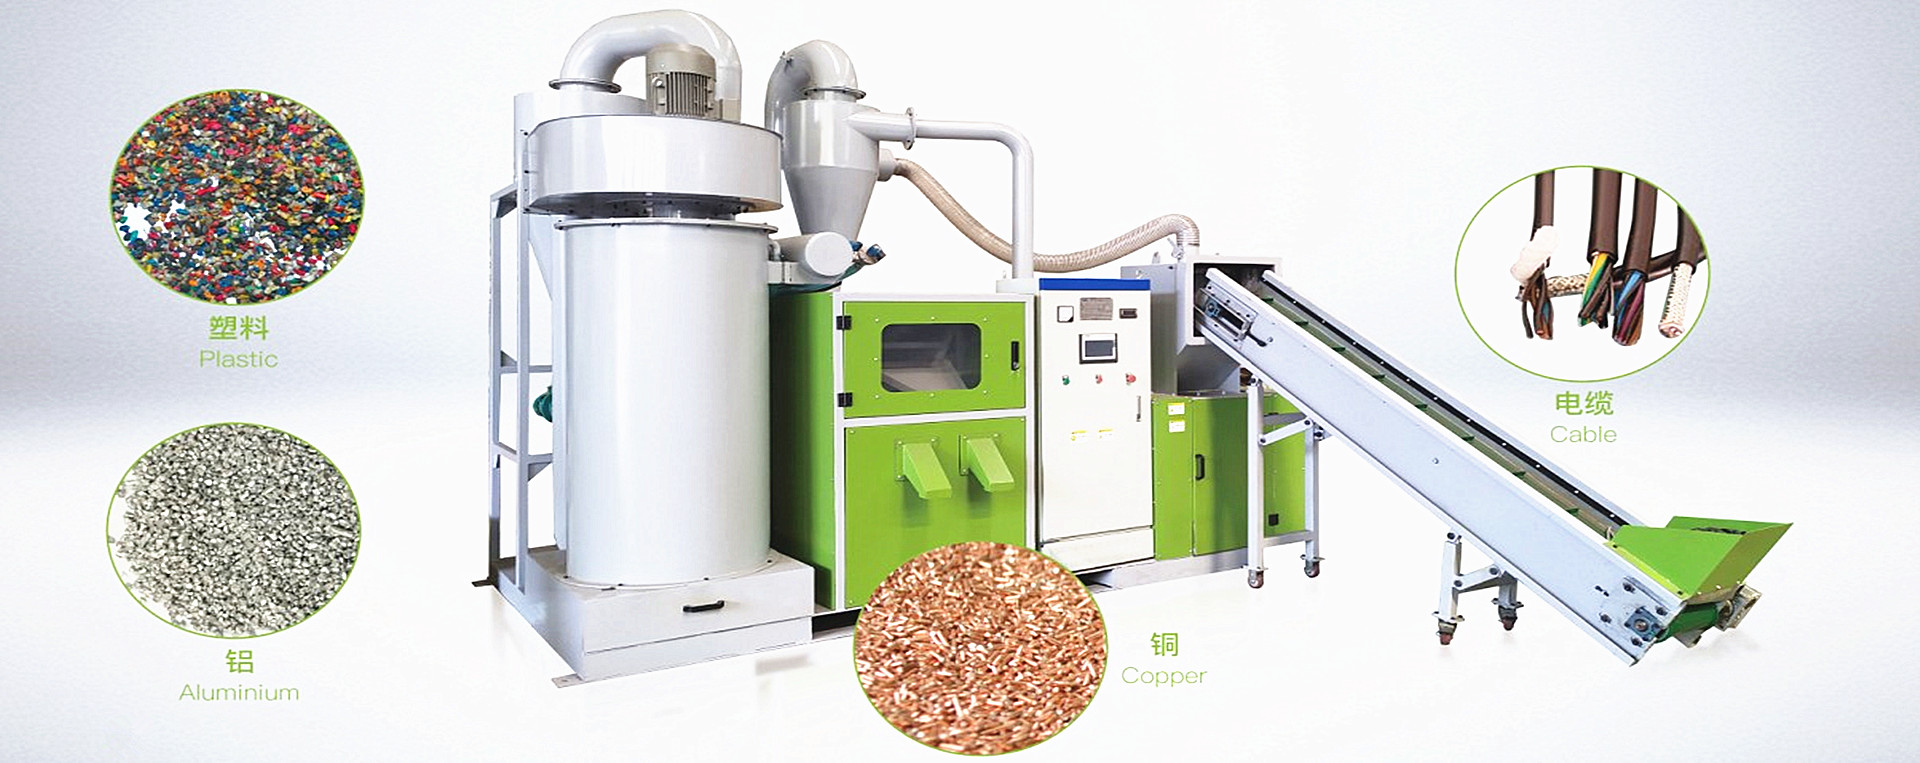 Cable recycling machine